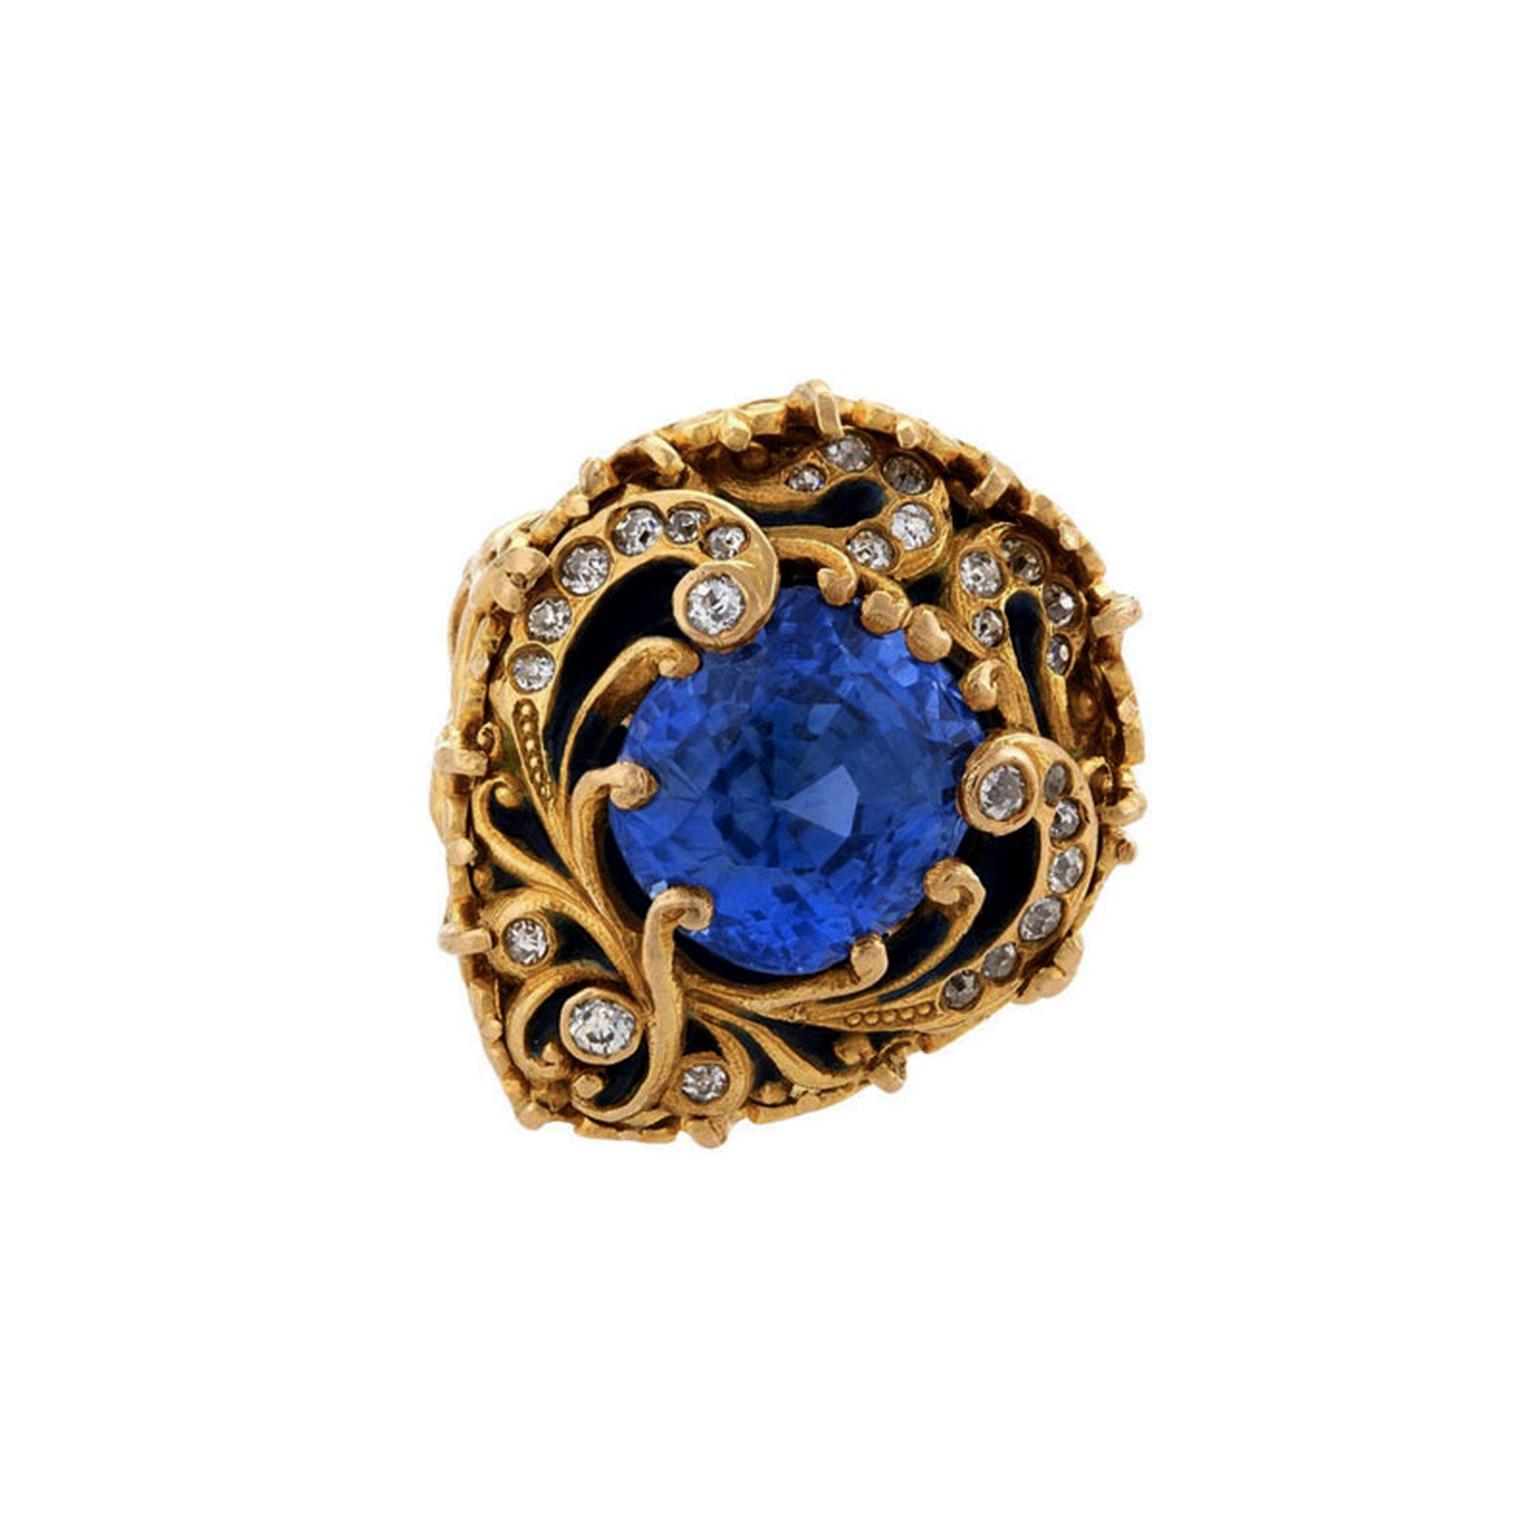 Marcus & Co blue sapphire gold ring from 1stdibs